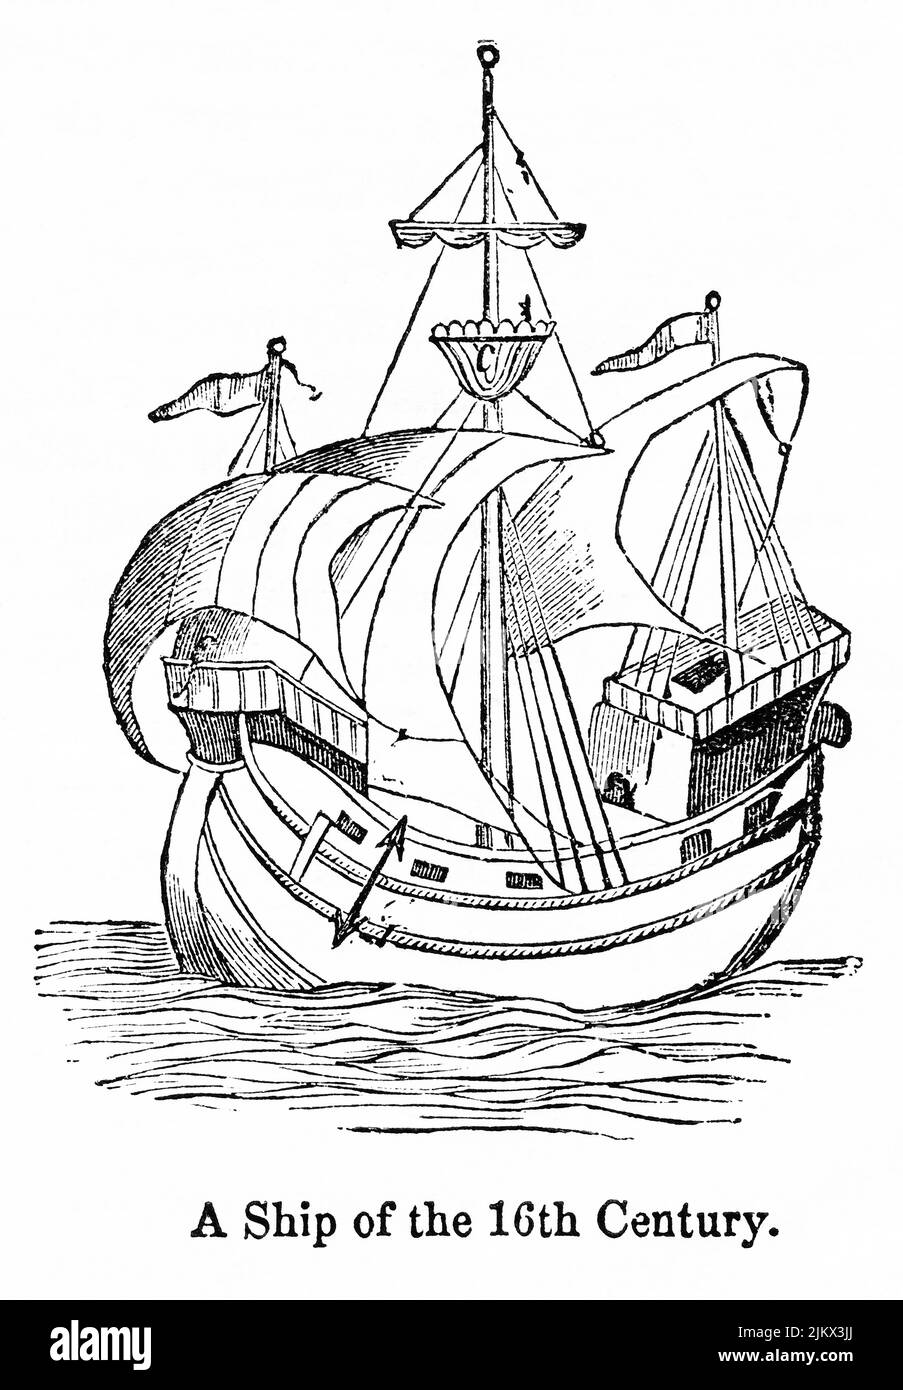 A Ship of the 16th Century, Illustration from the Book, 'John Cassel’s Illustrated History of England, Volume II', text by William Howitt, Cassell, Petter, and Galpin, London, 1858 Stock Photo